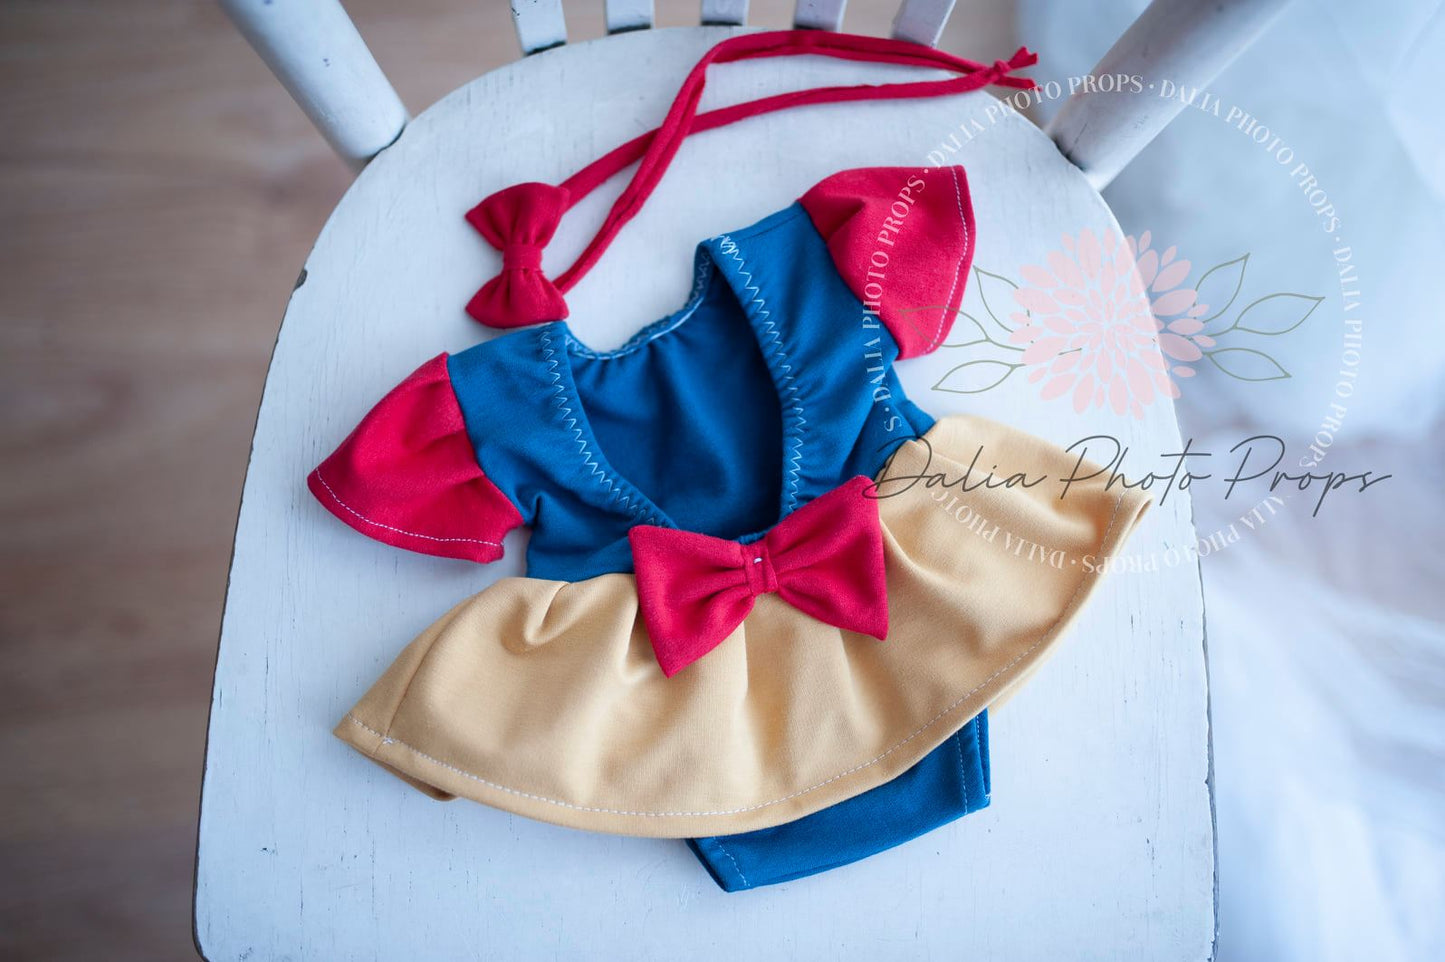 Princess Outfit - daliaphotoprops